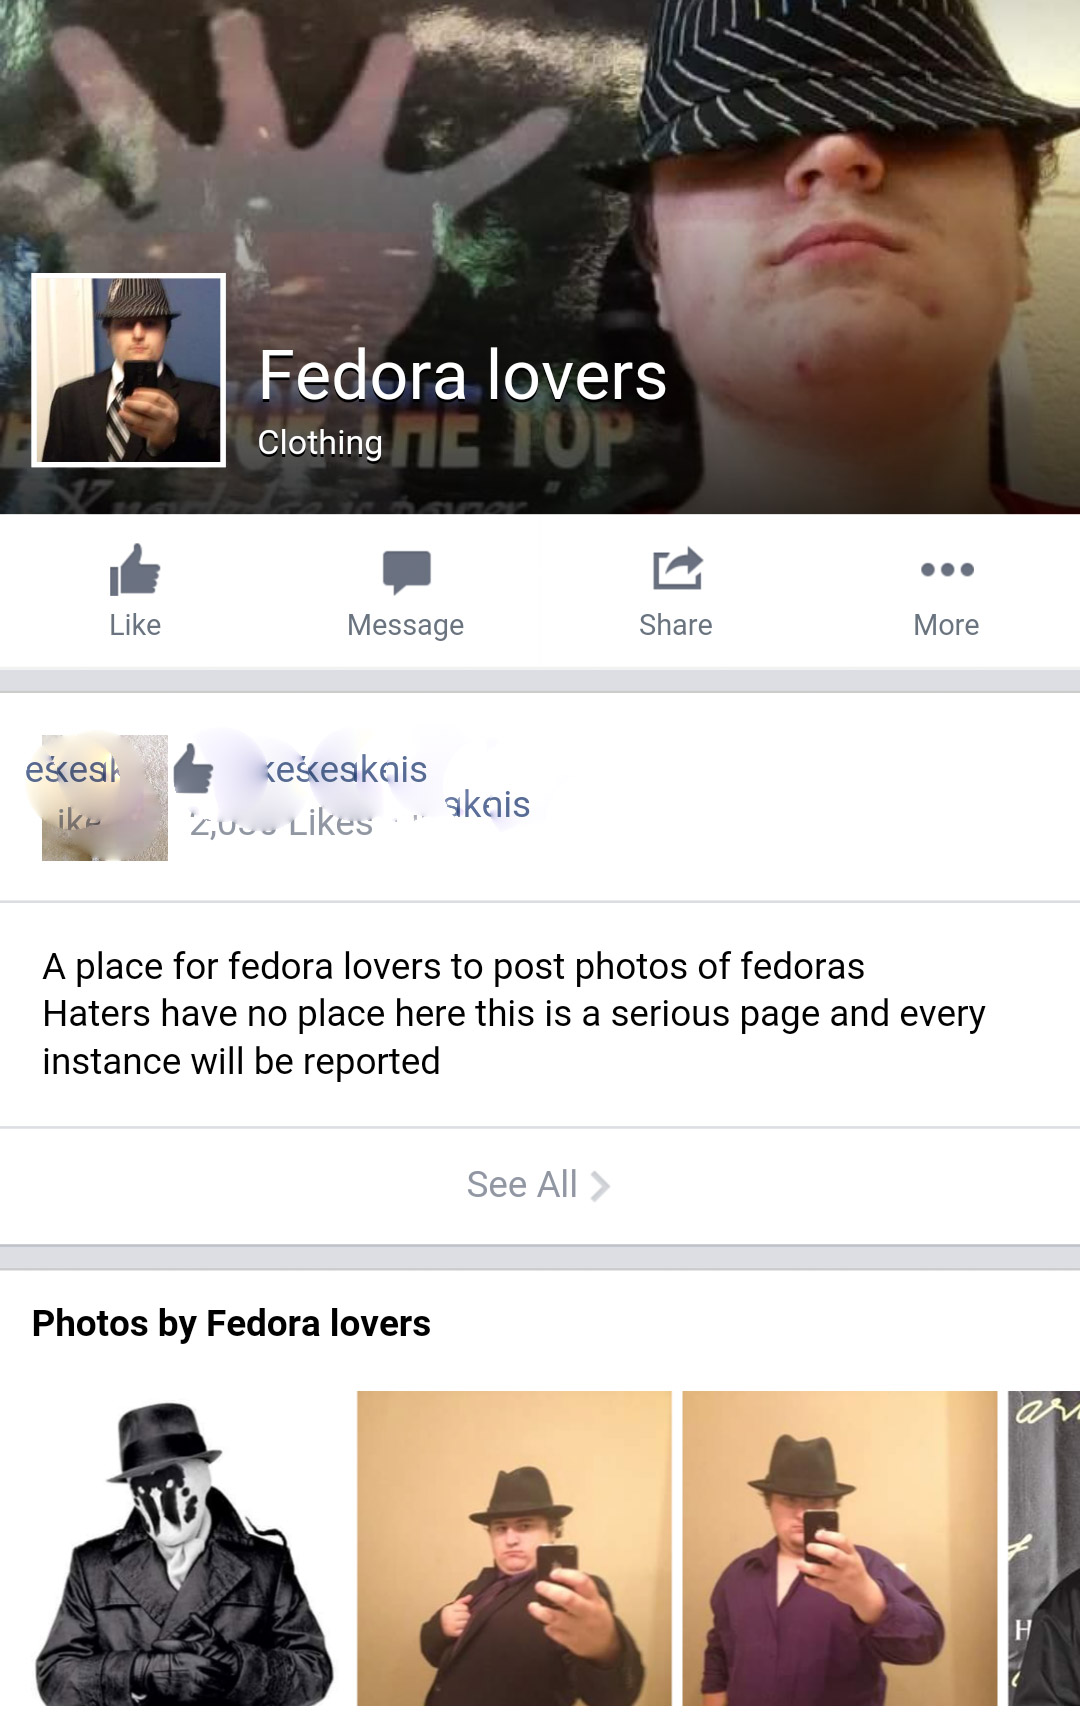 website - Fedora lovers Clothing Message More eses ike keskeskais 2,Ucu , skais A place for fedora lovers to post photos of fedoras Haters have no place here this is a serious page and every instance will be reported See All > Photos by Fedora lovers